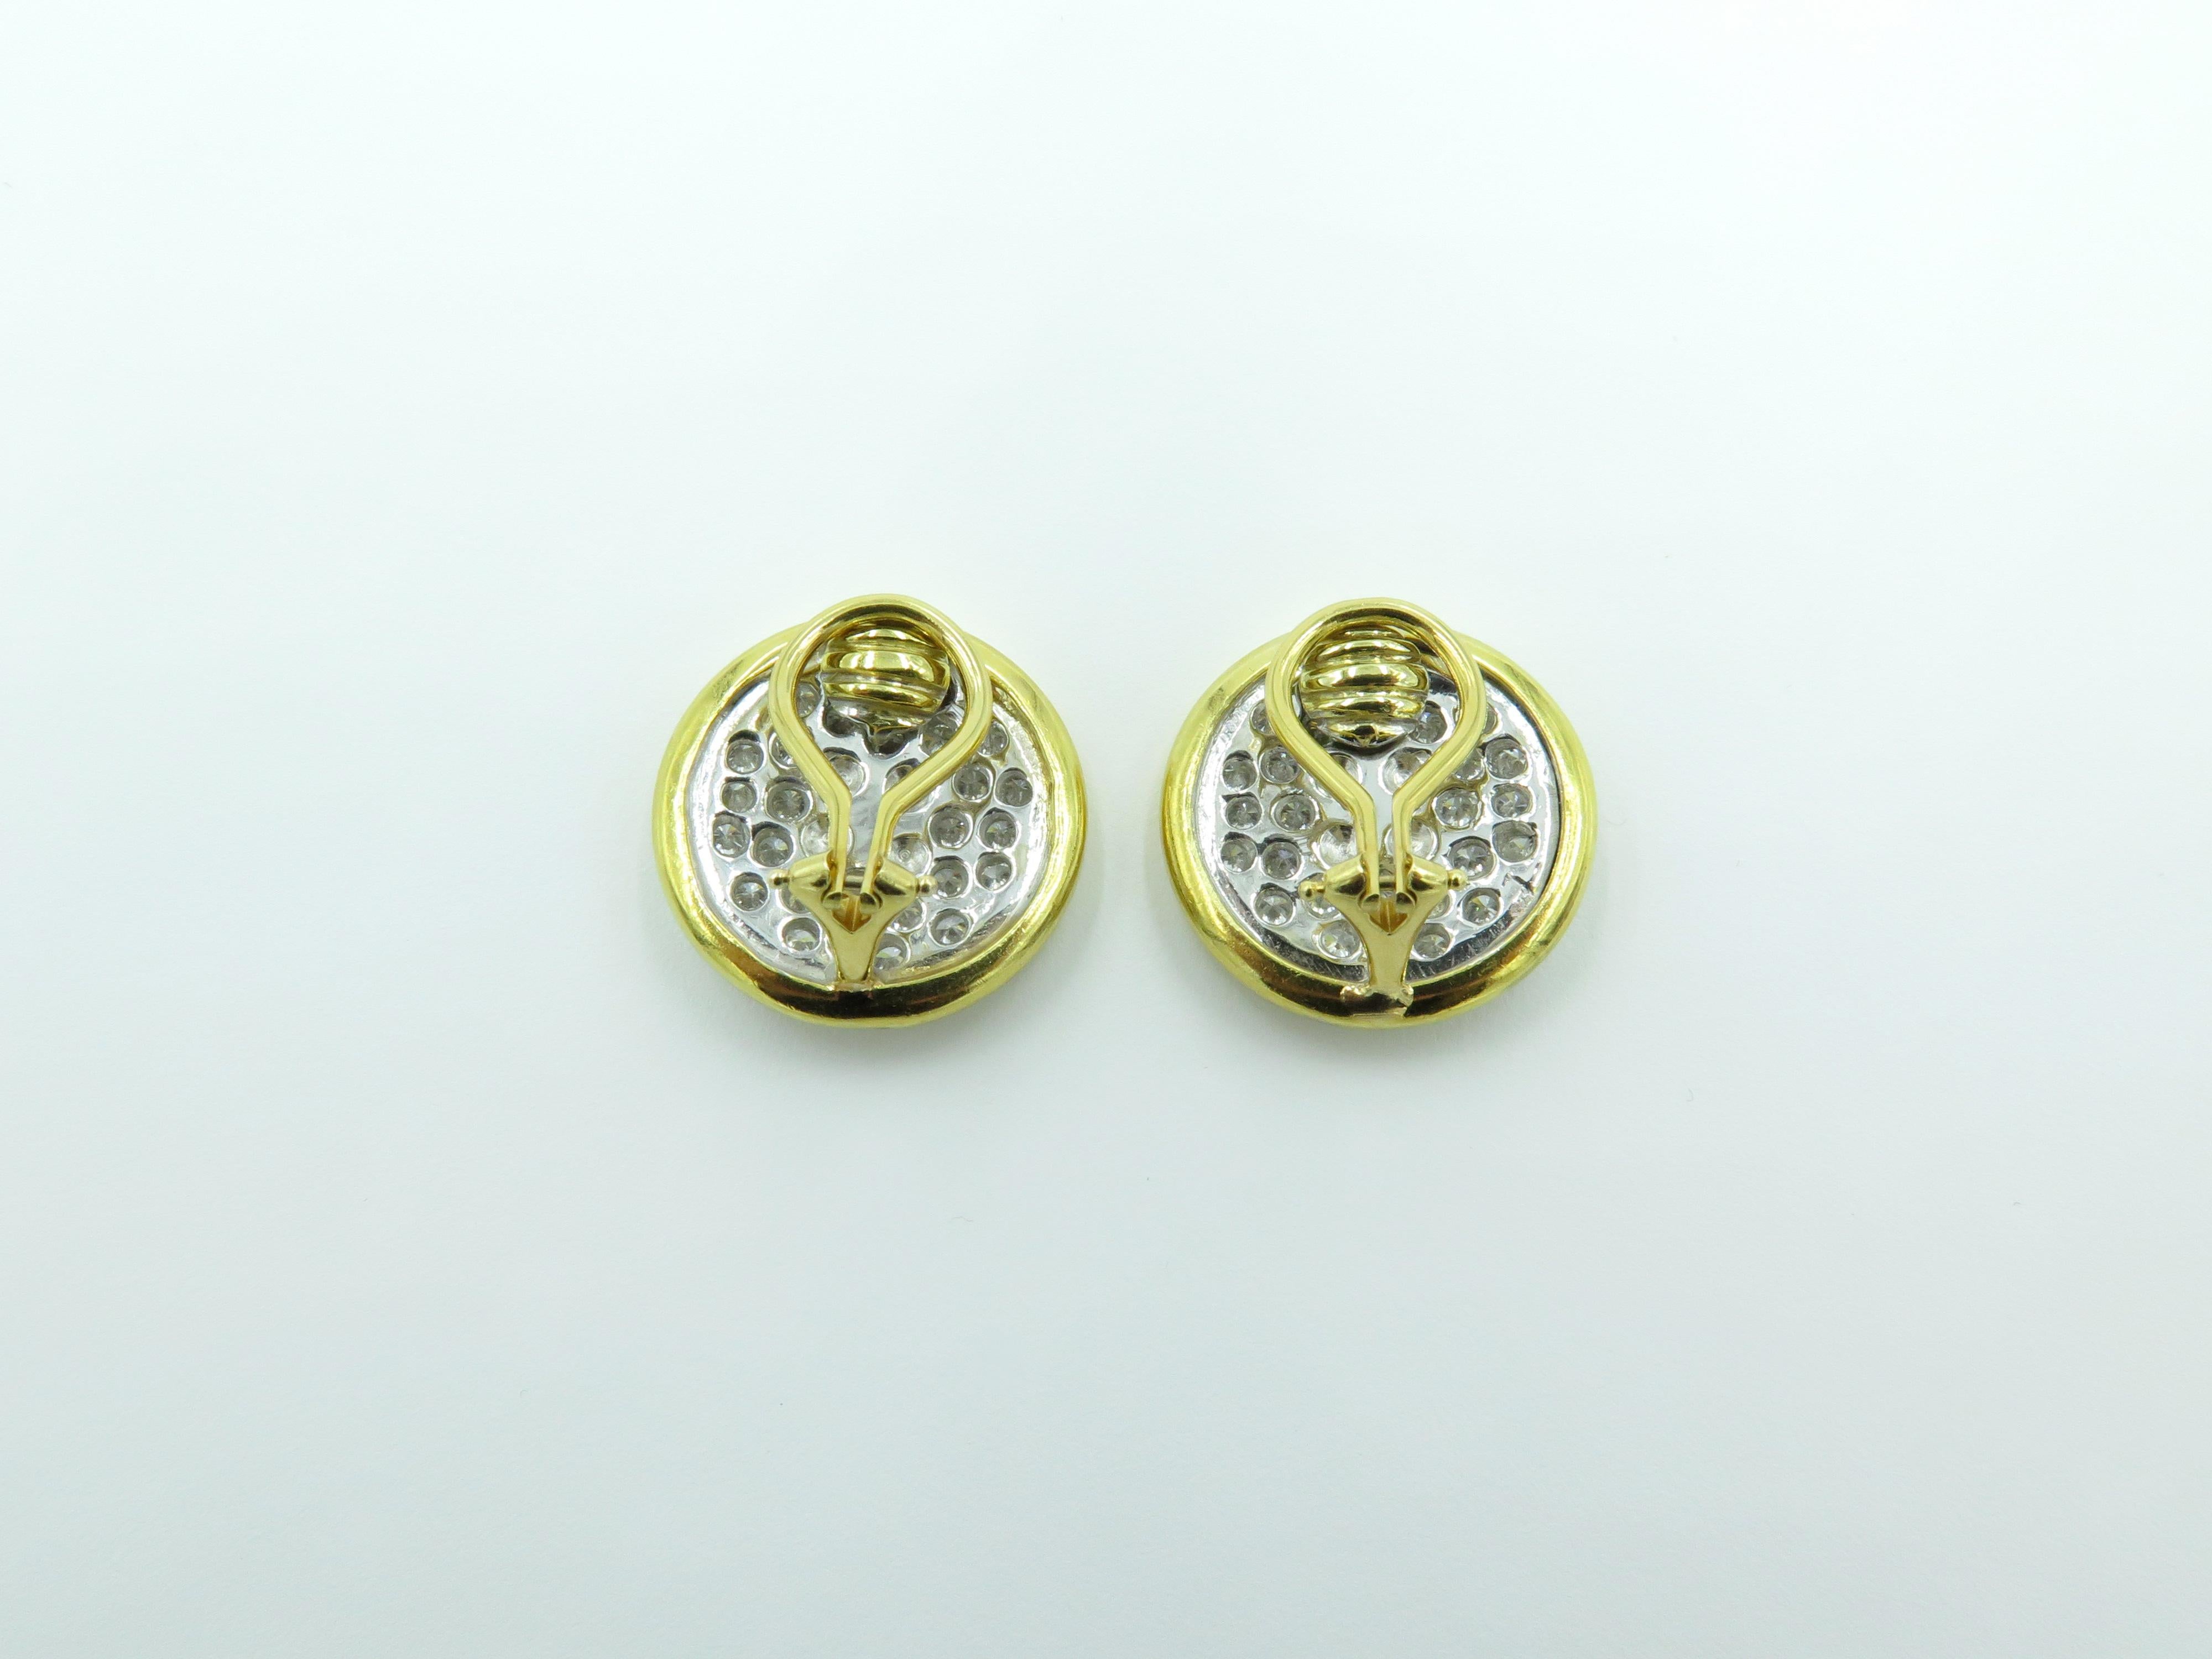 A pair of 18 karat yellow and white gold and diamond button earrings. Circa 1960.  Each round button pave set with diamonds, enhanced by a polished gold stitch. Fifty six (56) diamonds weigh approximately 2.50 carats. Diameter is approximately 3/4